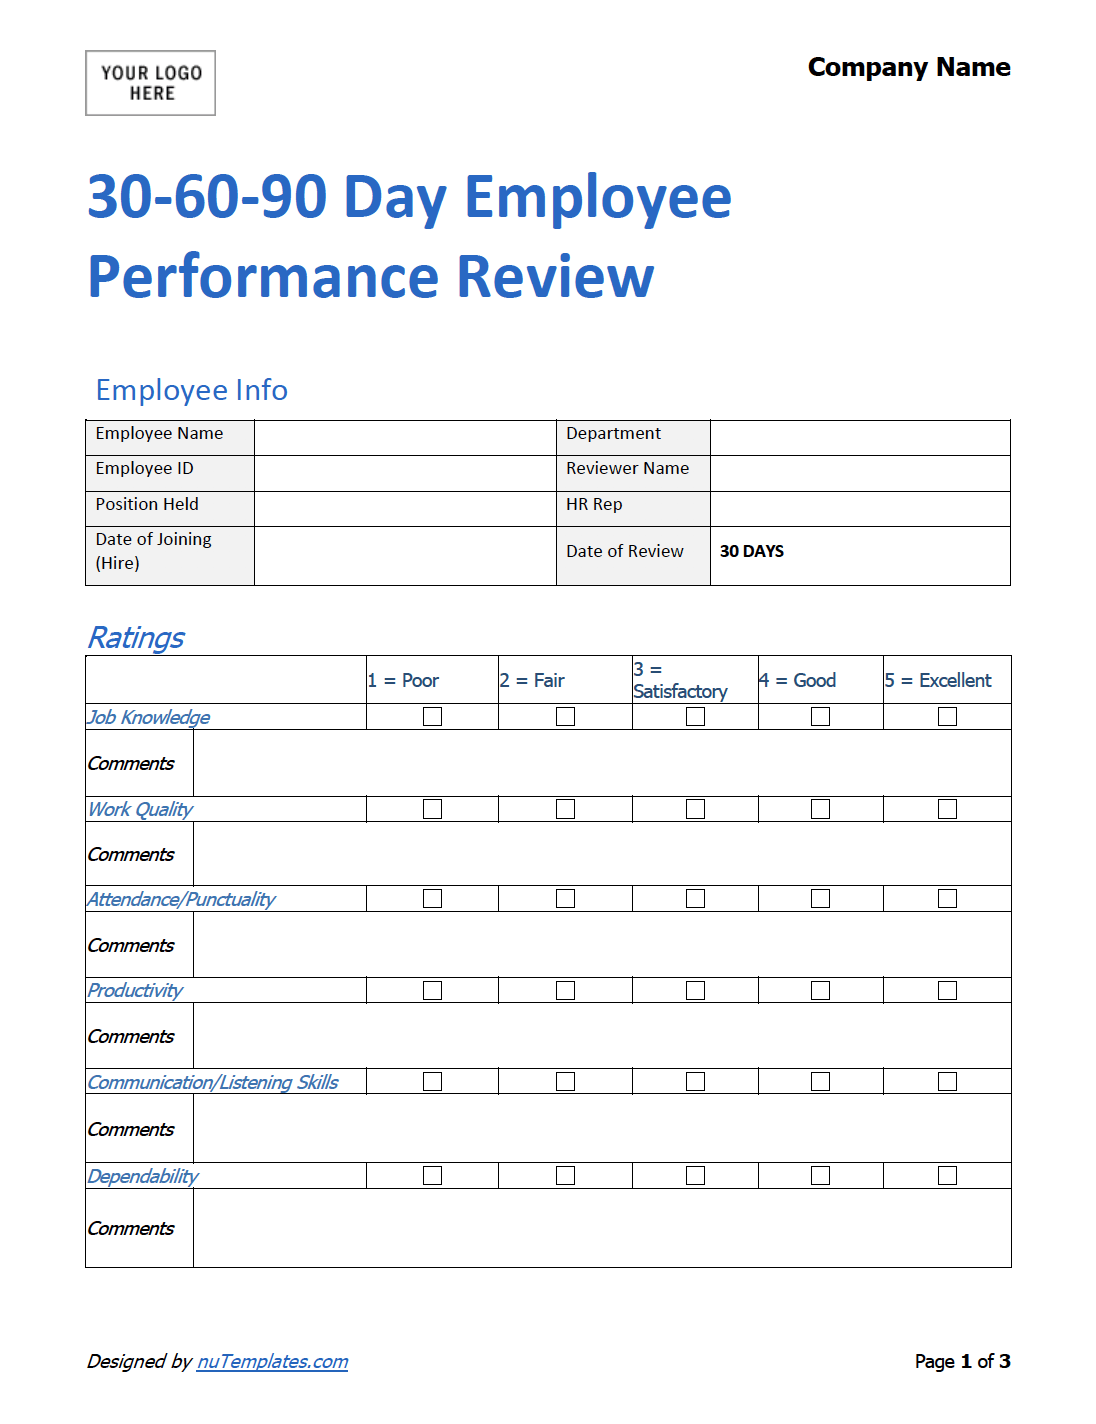 30-60-90-Day-Employee-Performance-Review-Template-jpg